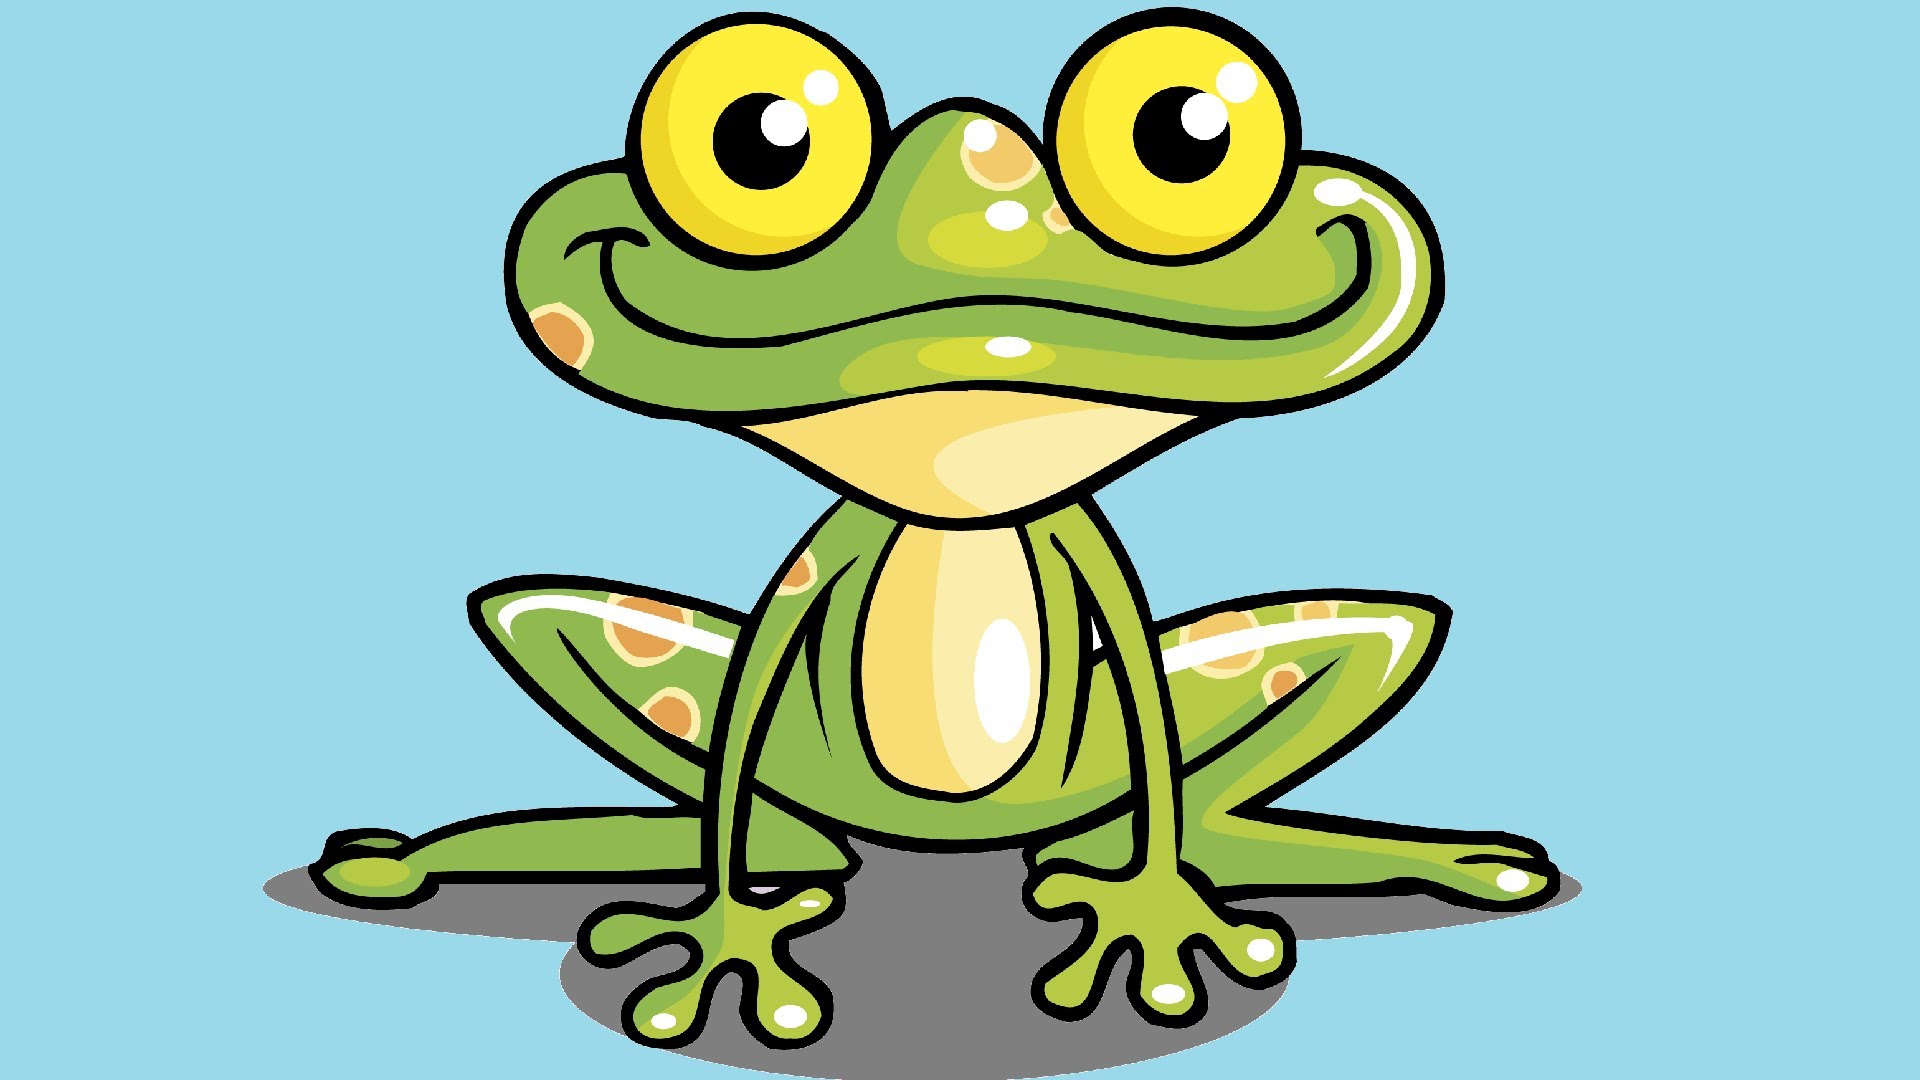 Five Little Speckled Frogs Song | Kids Learning Videos - YouTube